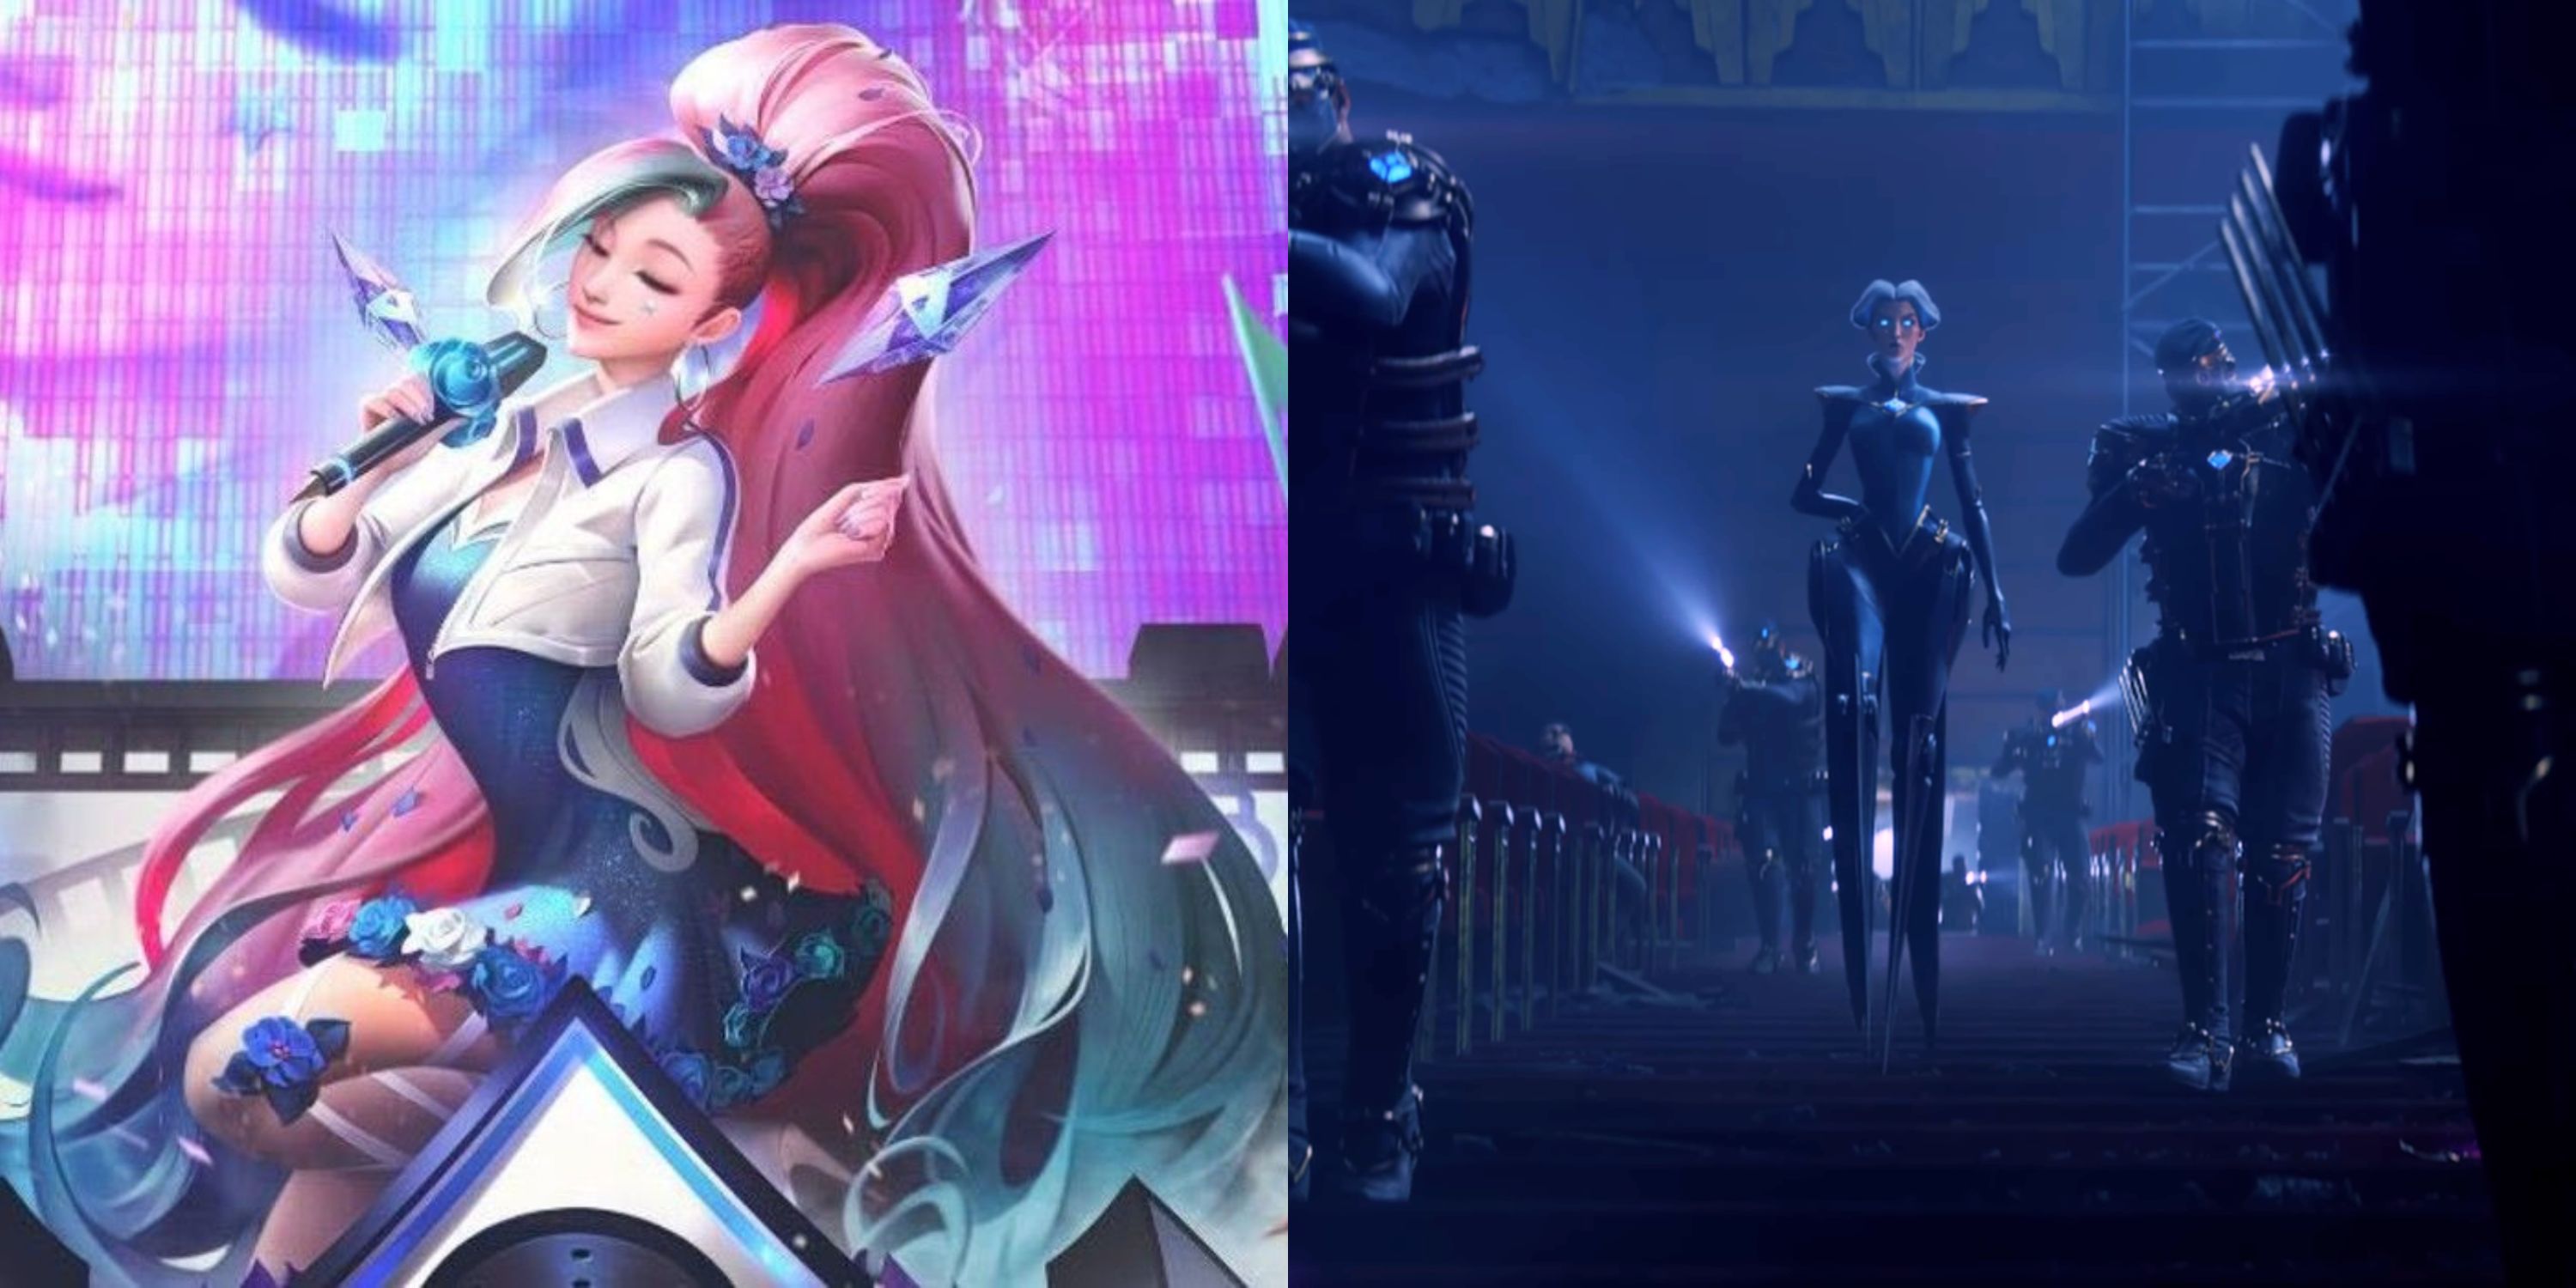 Featured image showing artwork for Seraphine from League of Legends and Camille in a cinematic